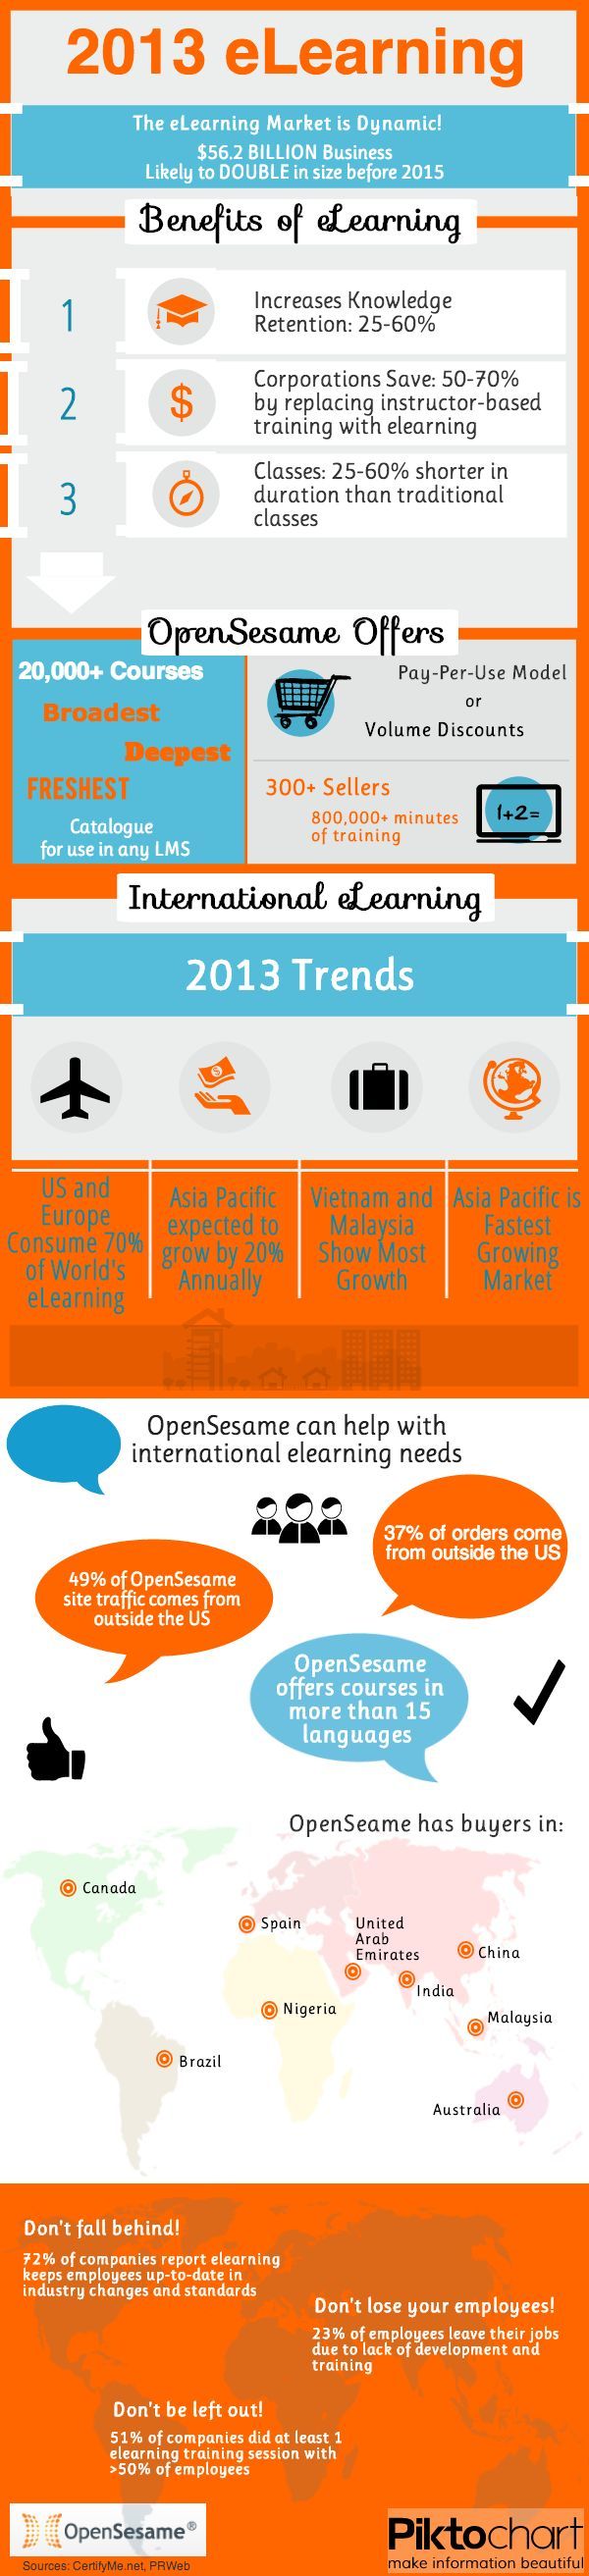 eLearning Industry Trends 2013 Infographic